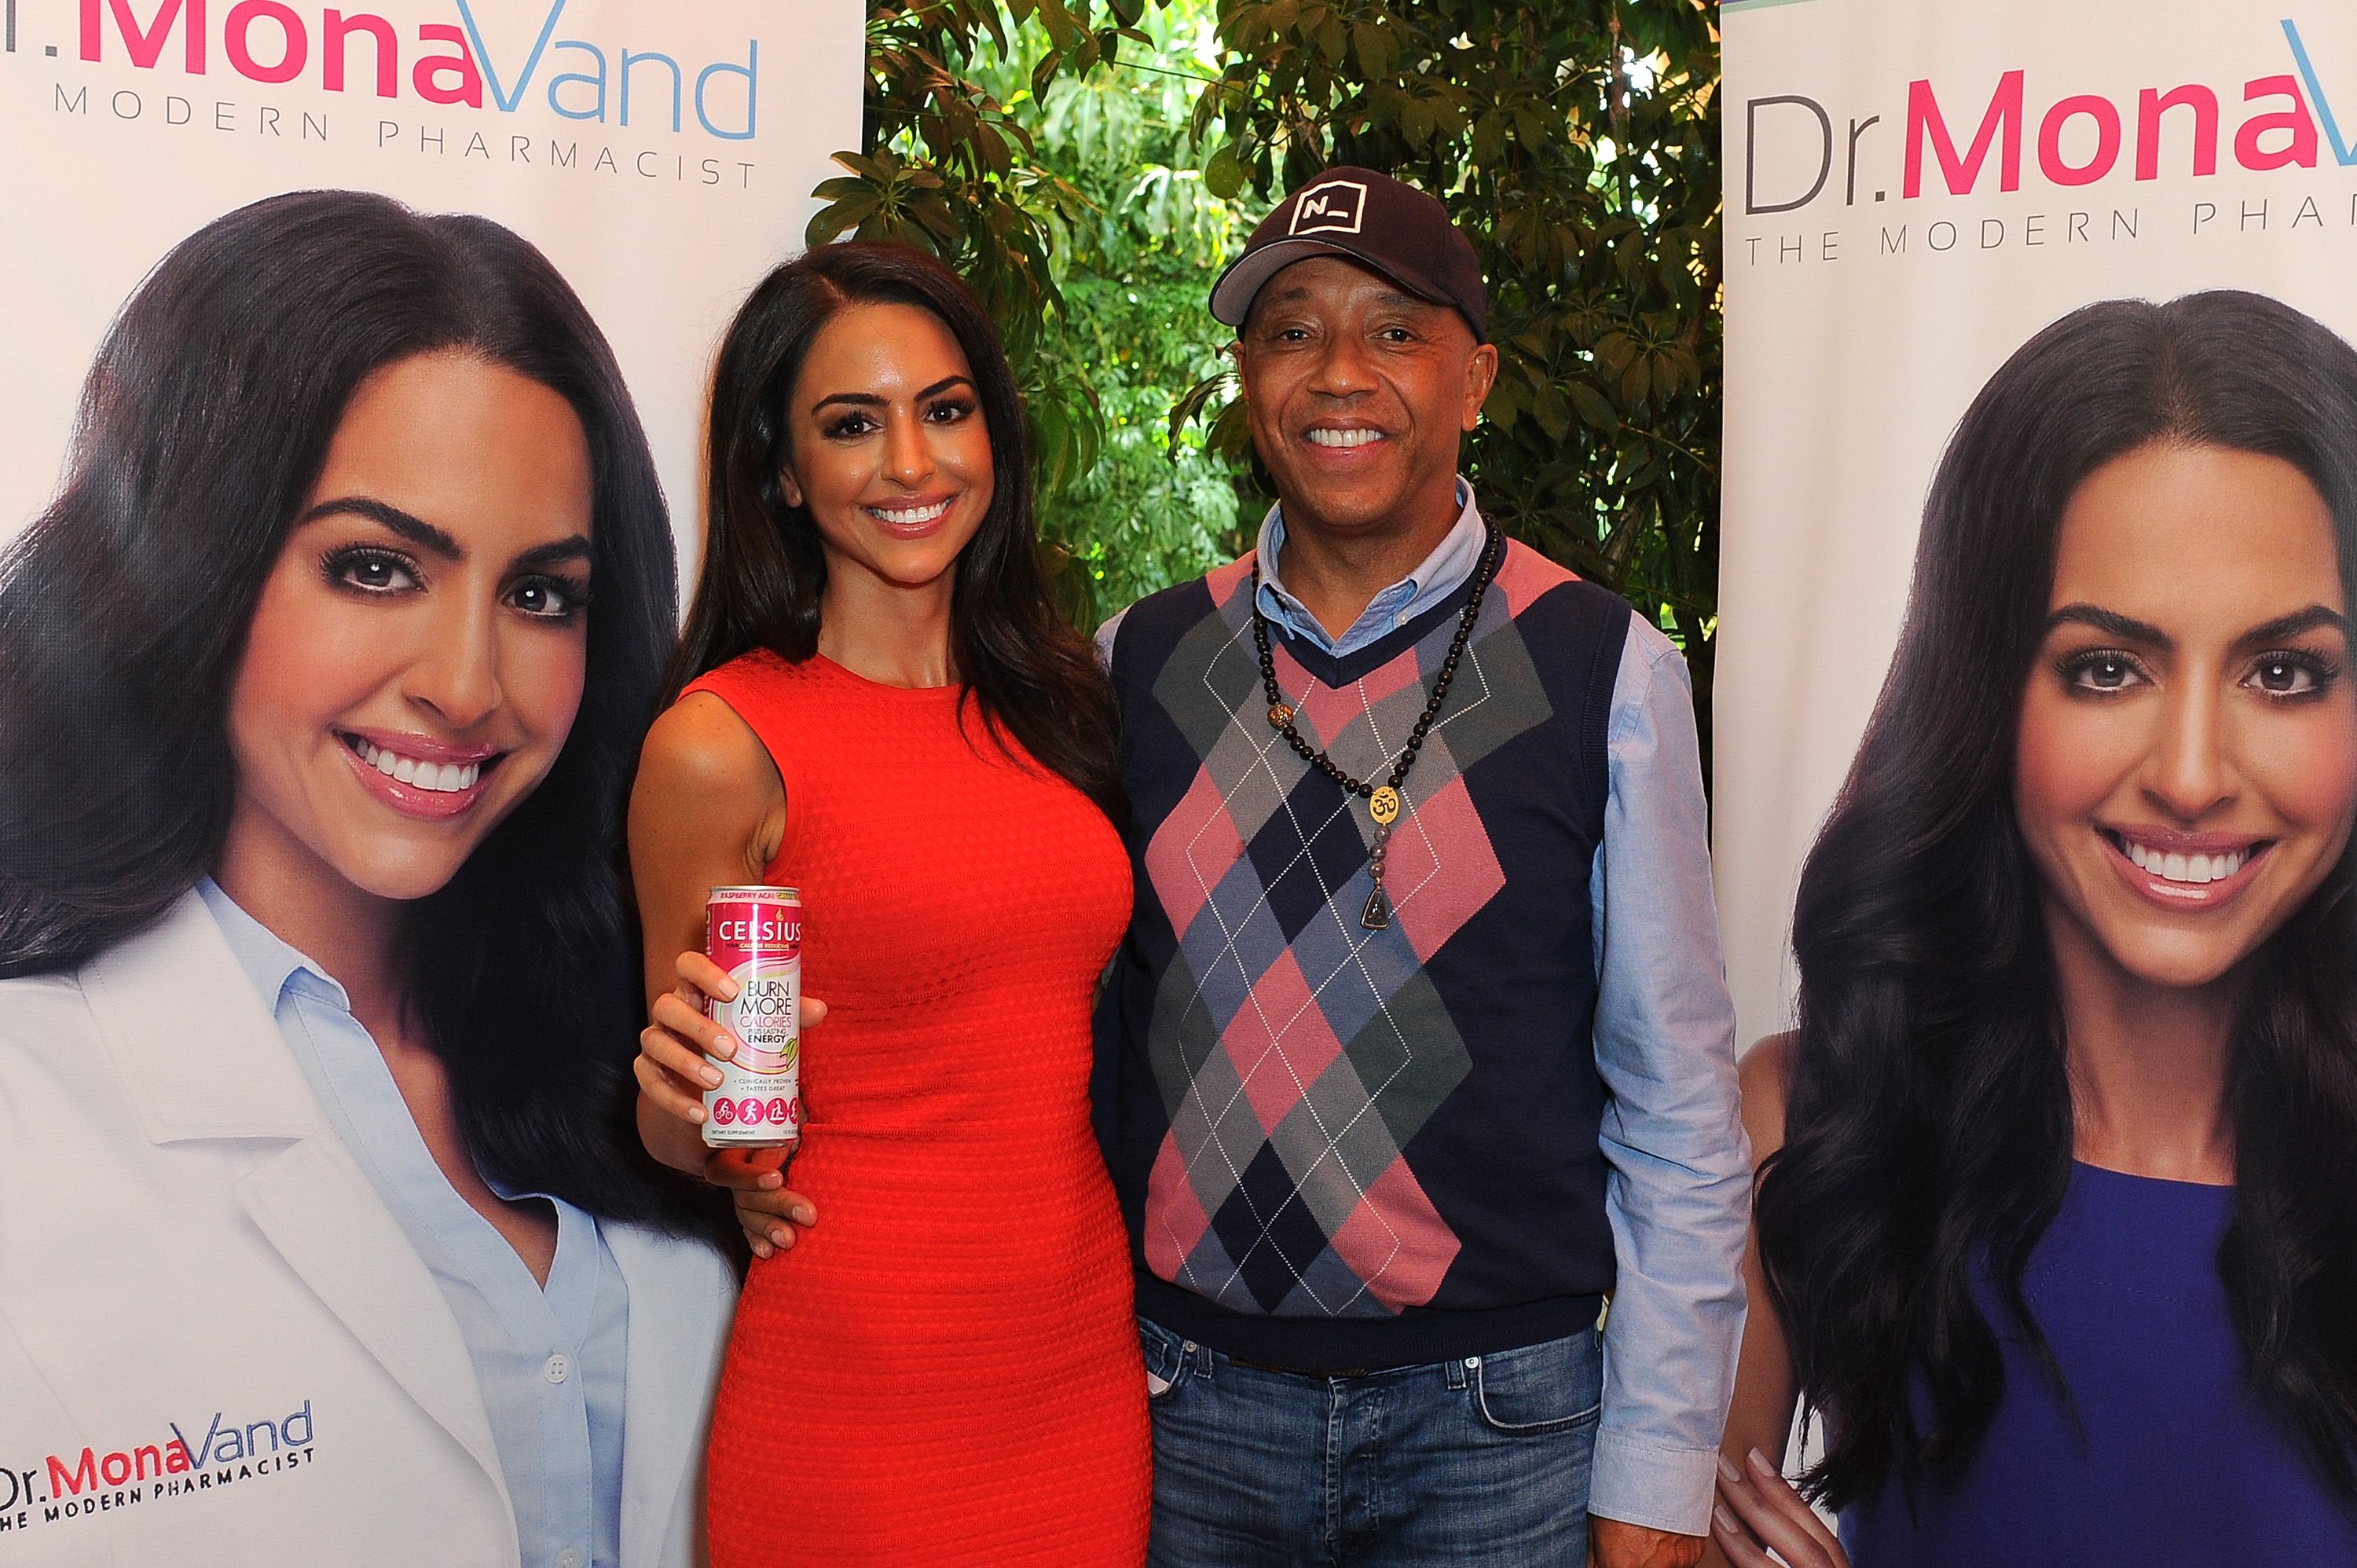 RUSSELL SIMMONS Shows Support For DR. MONA VAND’S Modern Pharmacist Movemen...